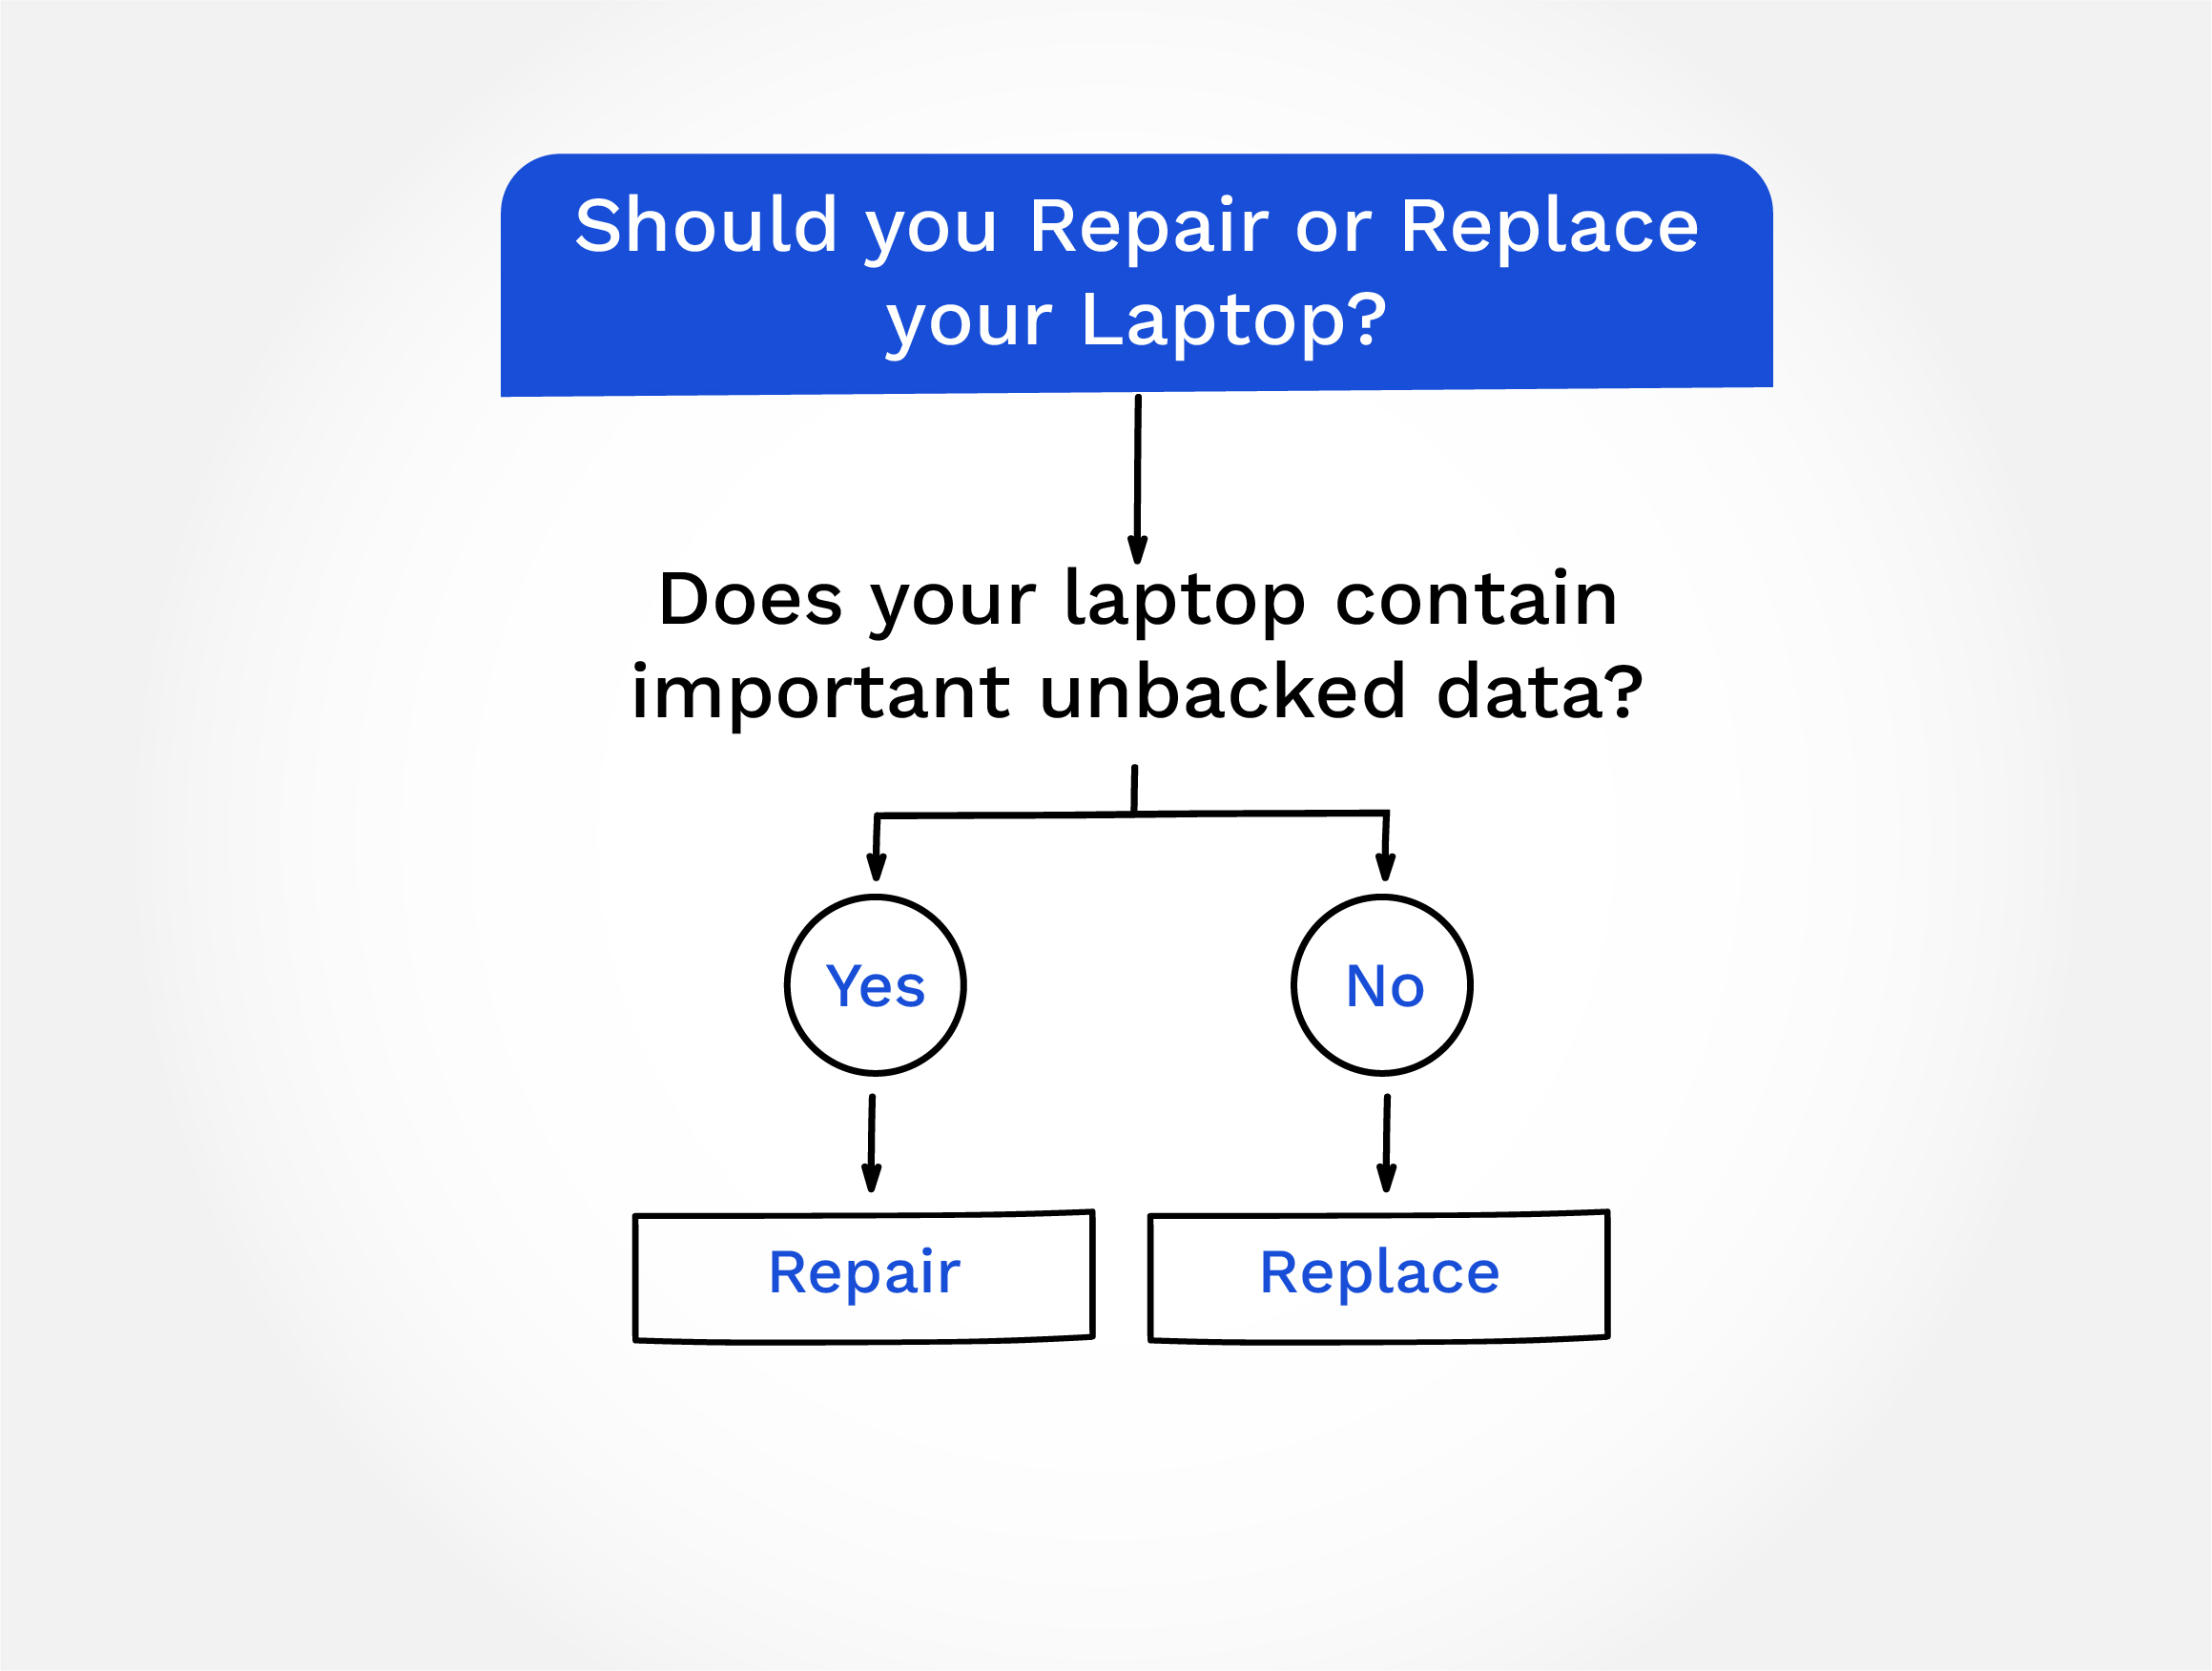 Does Your Laptop Contain Important Unbacked Data?